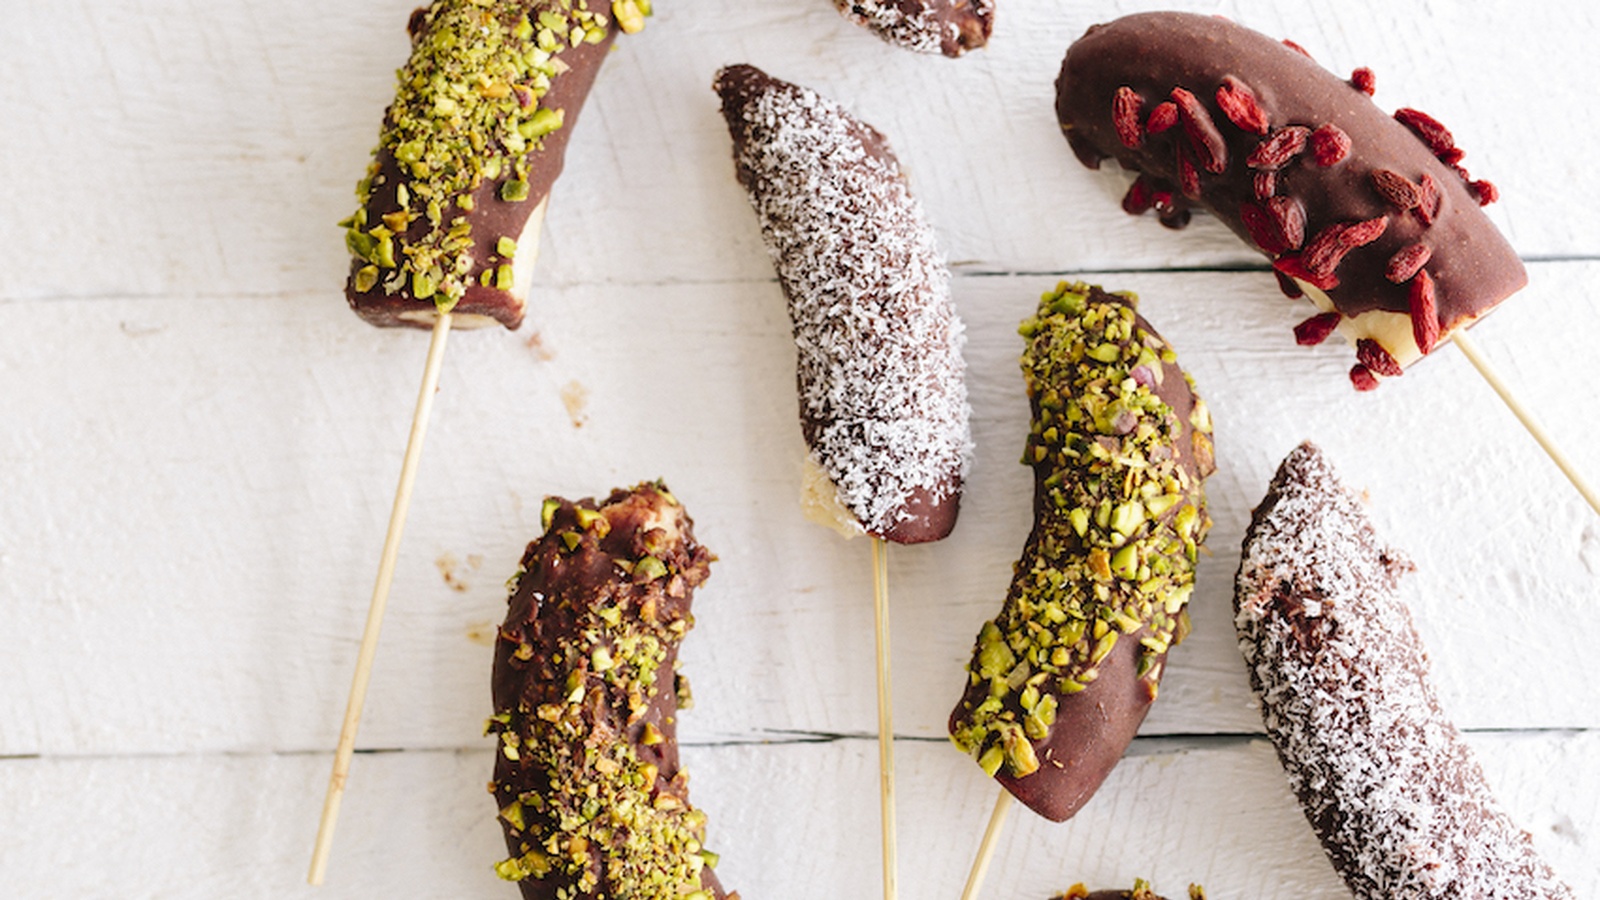 Chocolate Covered Banana Popsicles